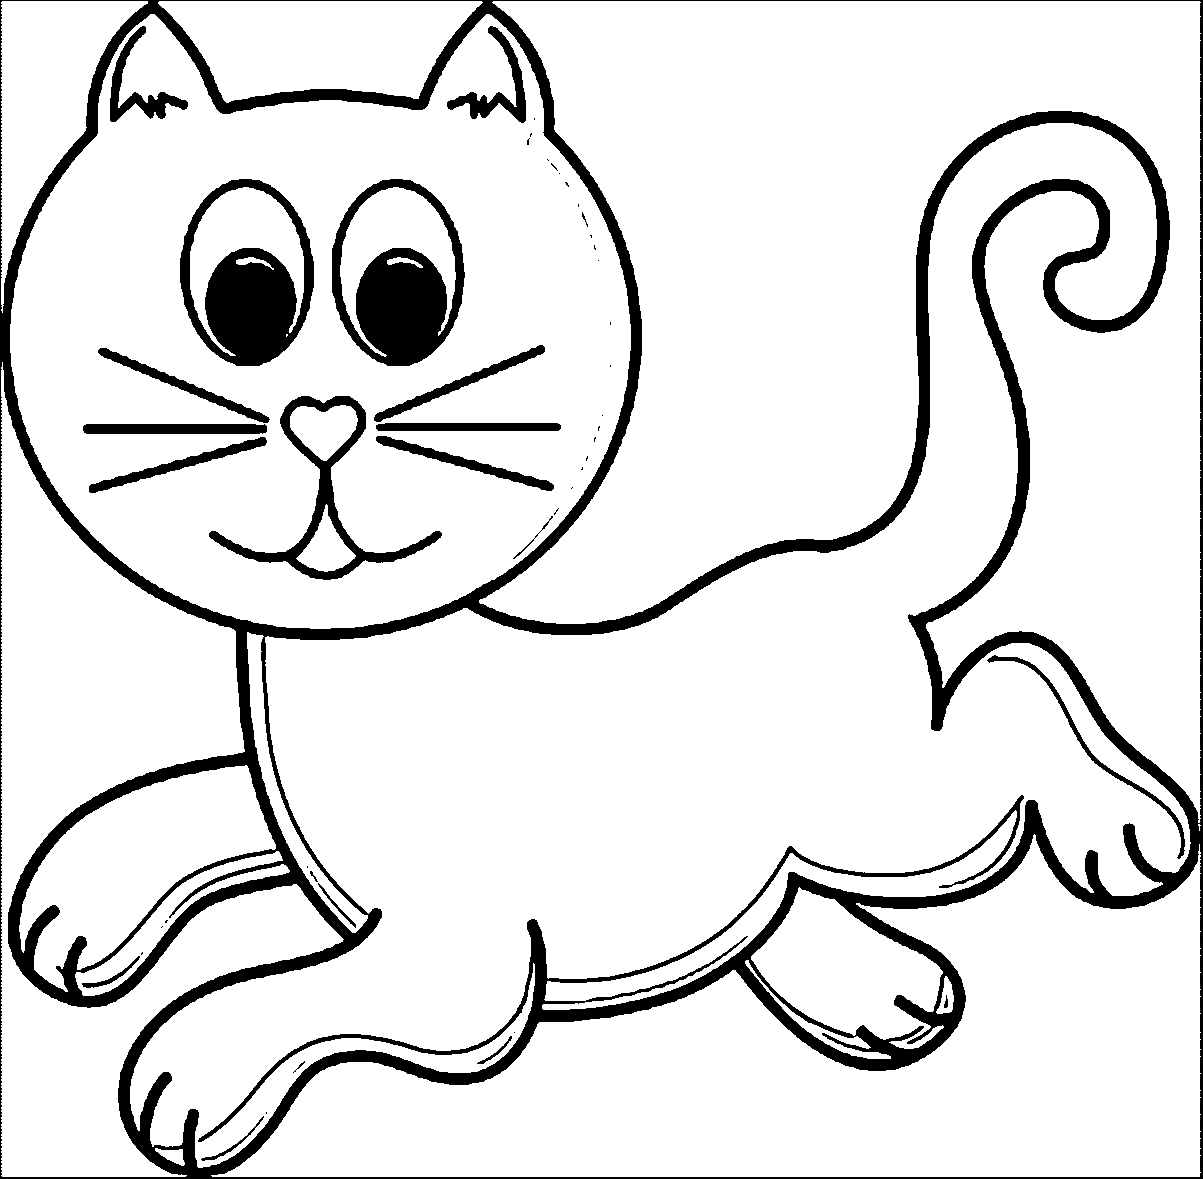 kitty-cat-coloring-pages